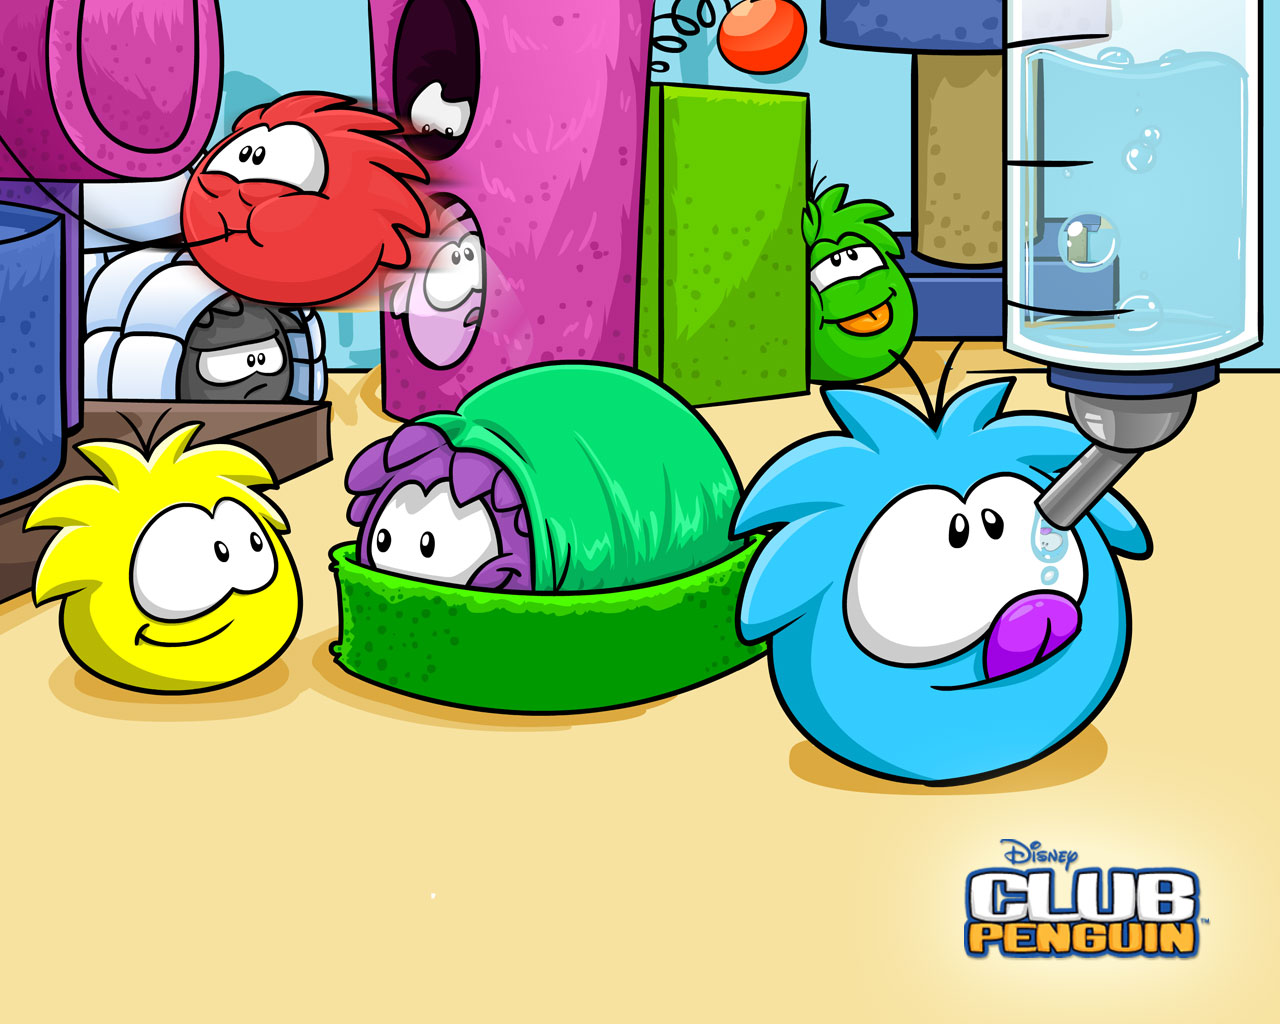 i-would-somtimes-say-never-club-penguin